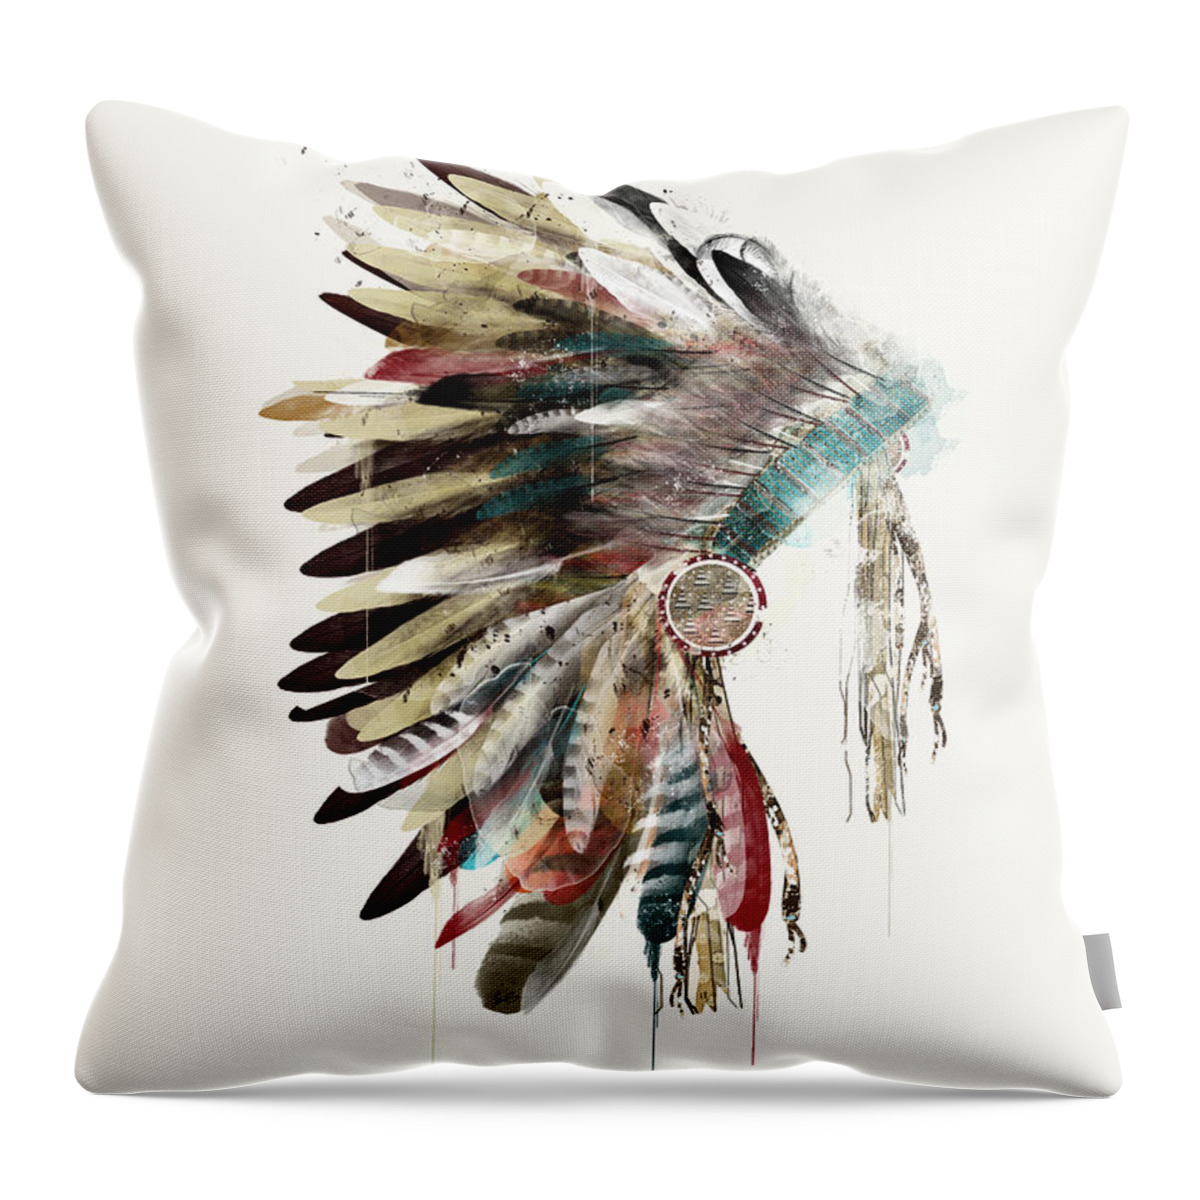 Headdress Throw Pillow featuring the painting The Headdress by Bri Buckley